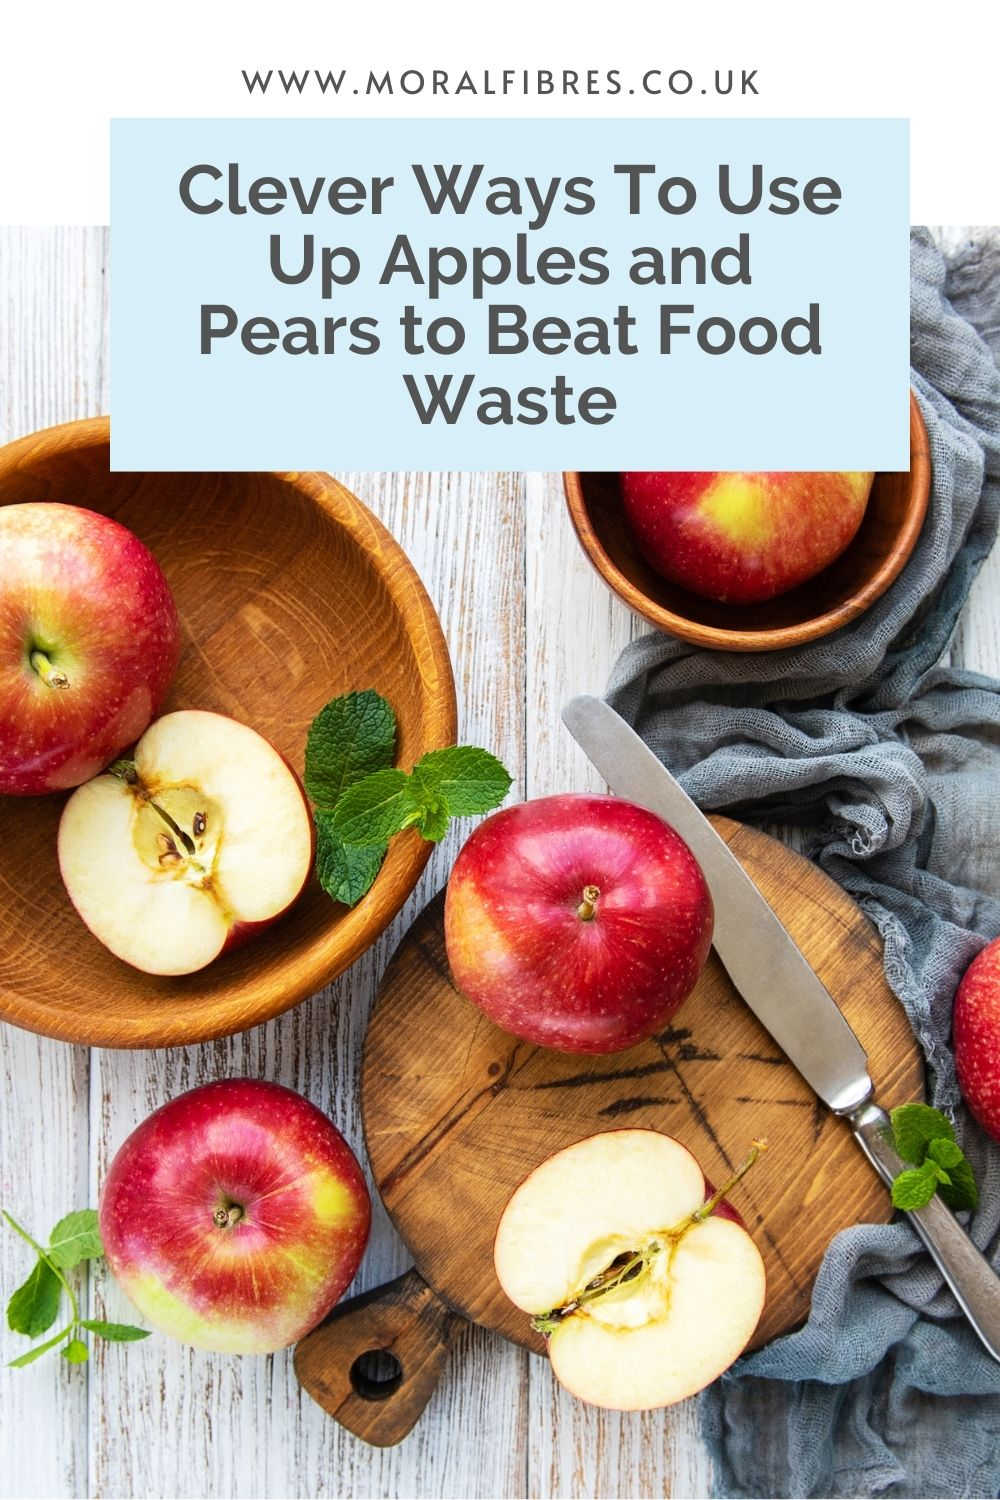 Apples being prepared for cooking and eating, with a blue text box that says how to use up apples and pears to beat food waste